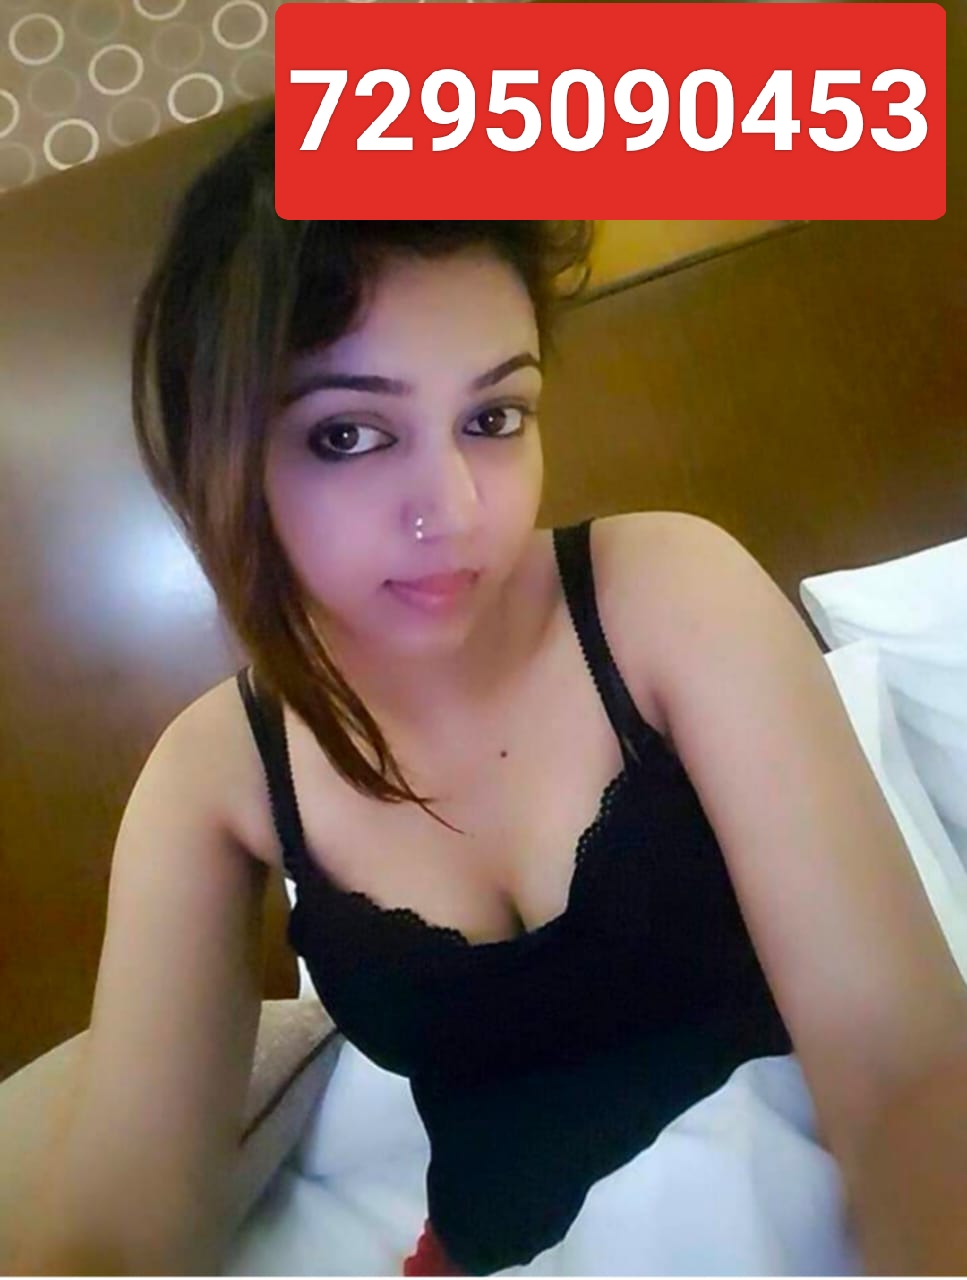 Miss Sweta available cash payment 